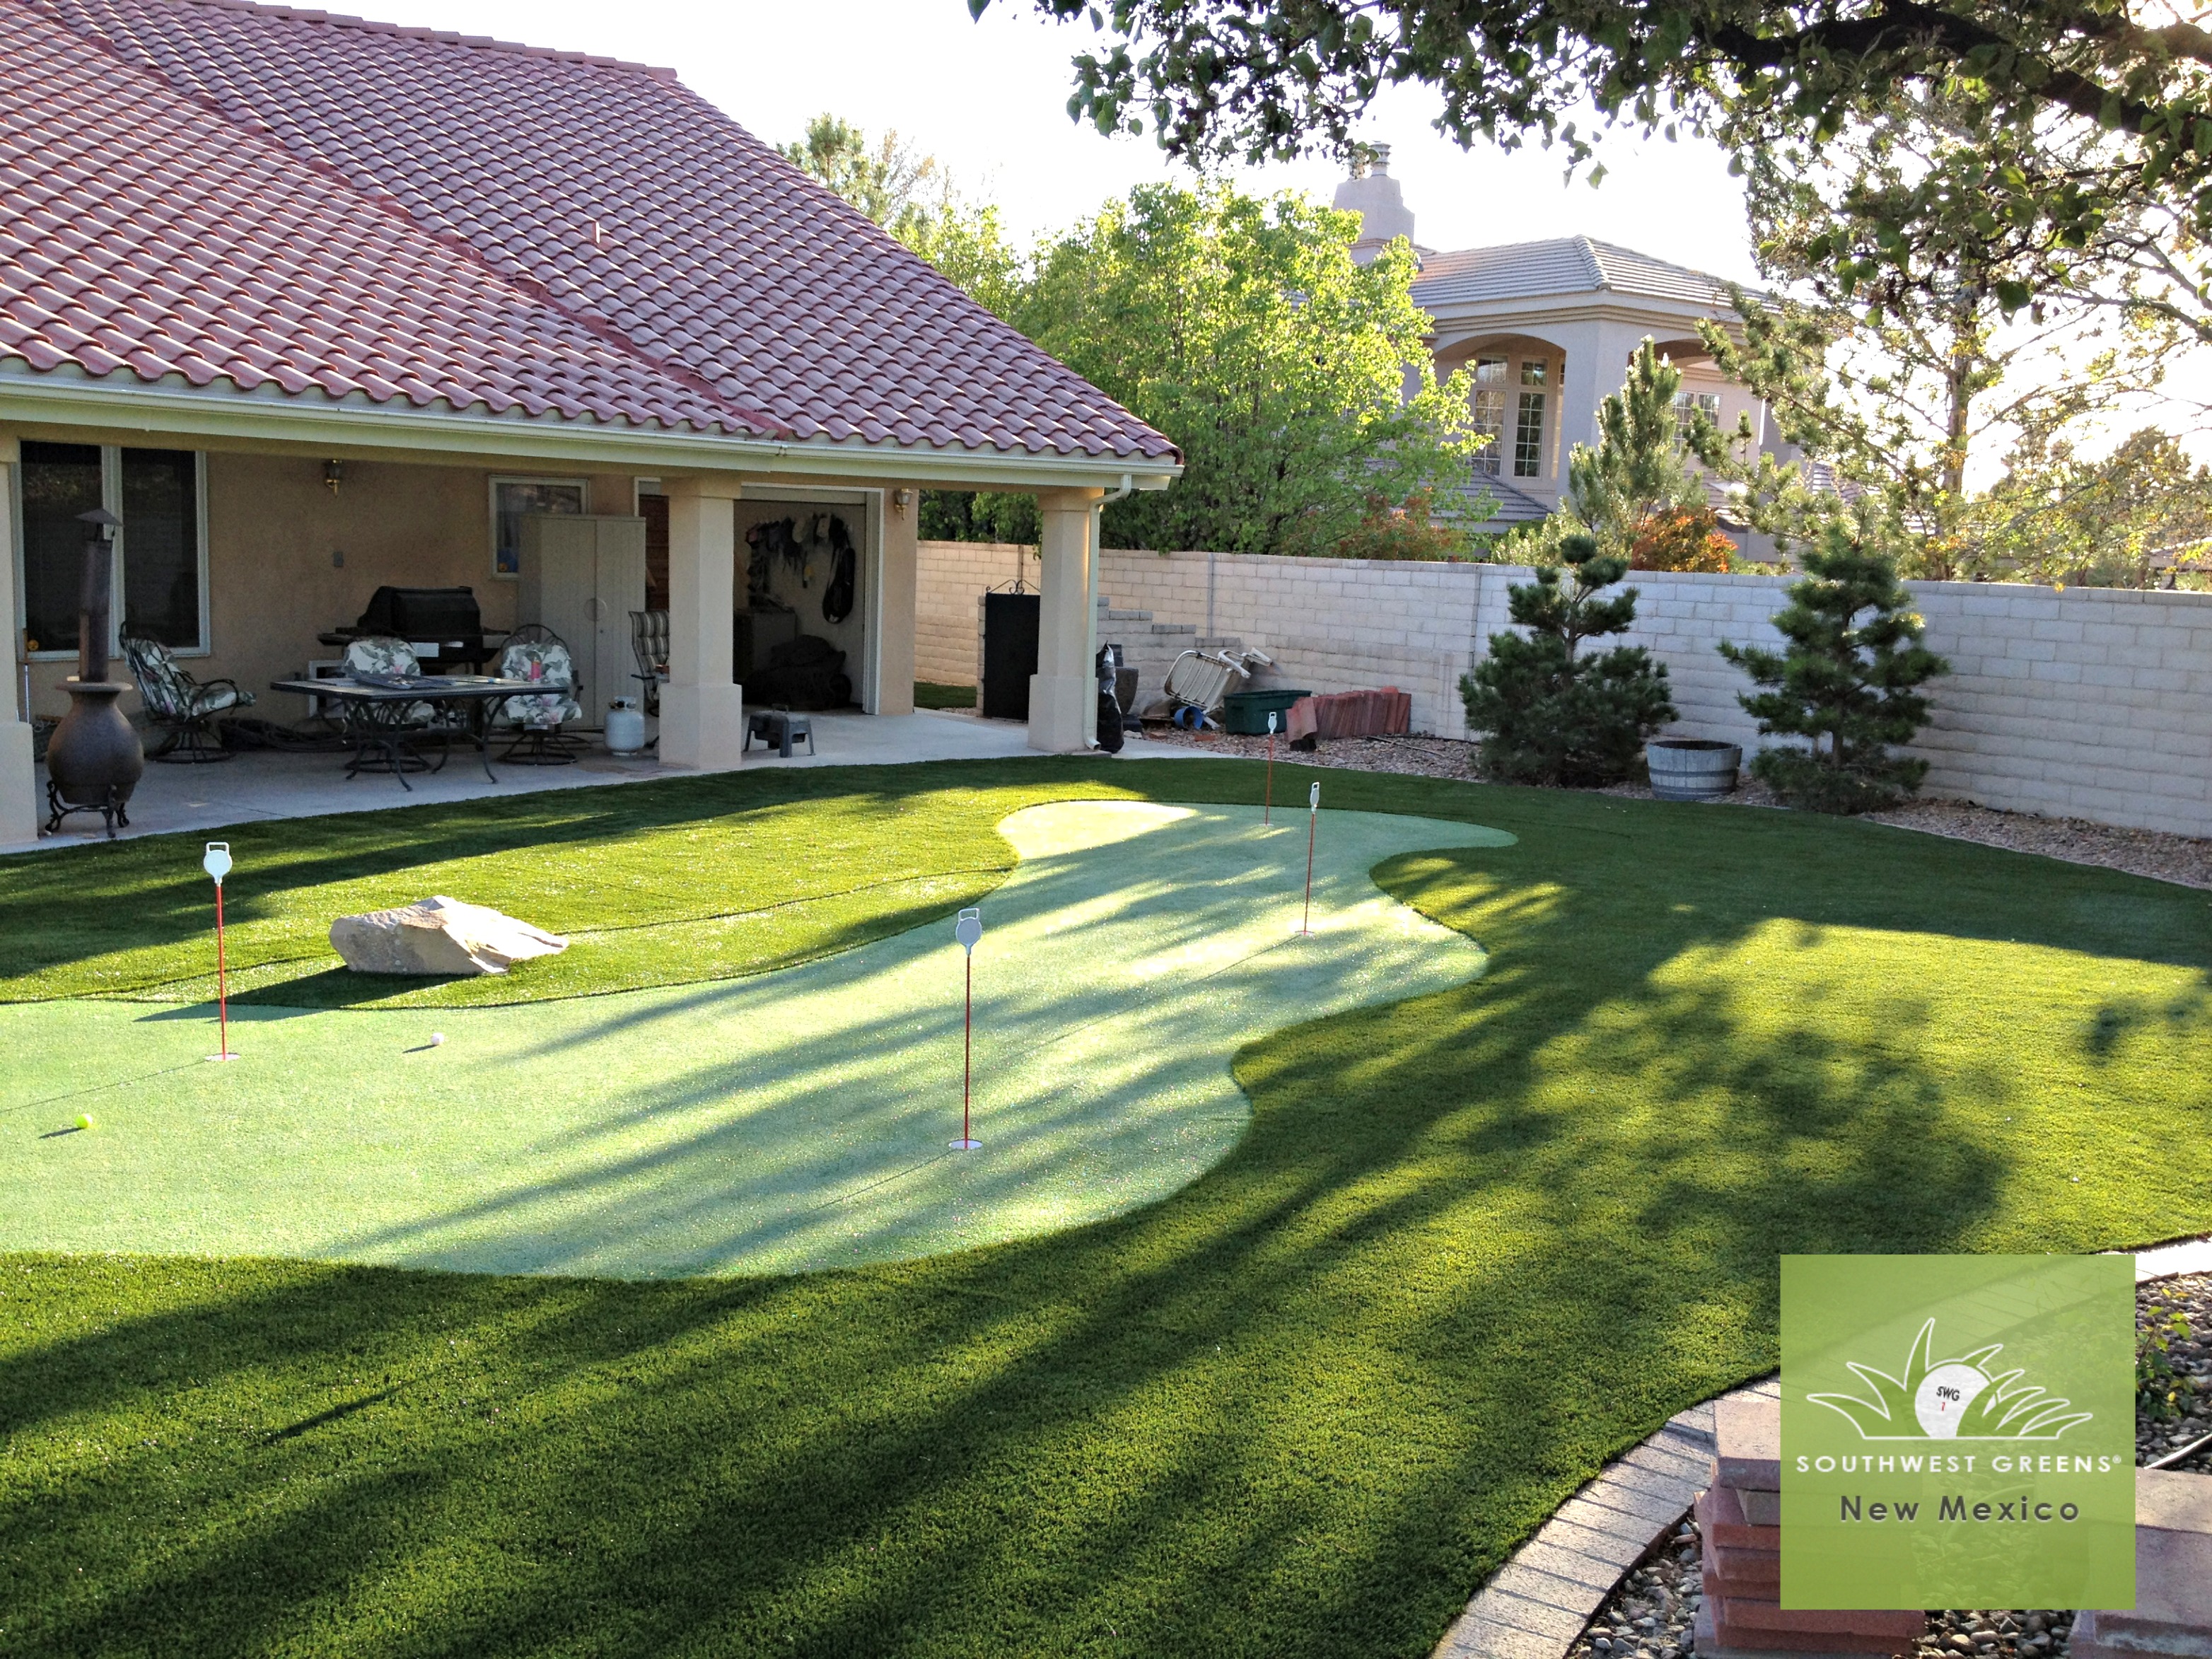 A backyard putting green can provide hours of entertainment or the perfect practice space for the serious golfer!